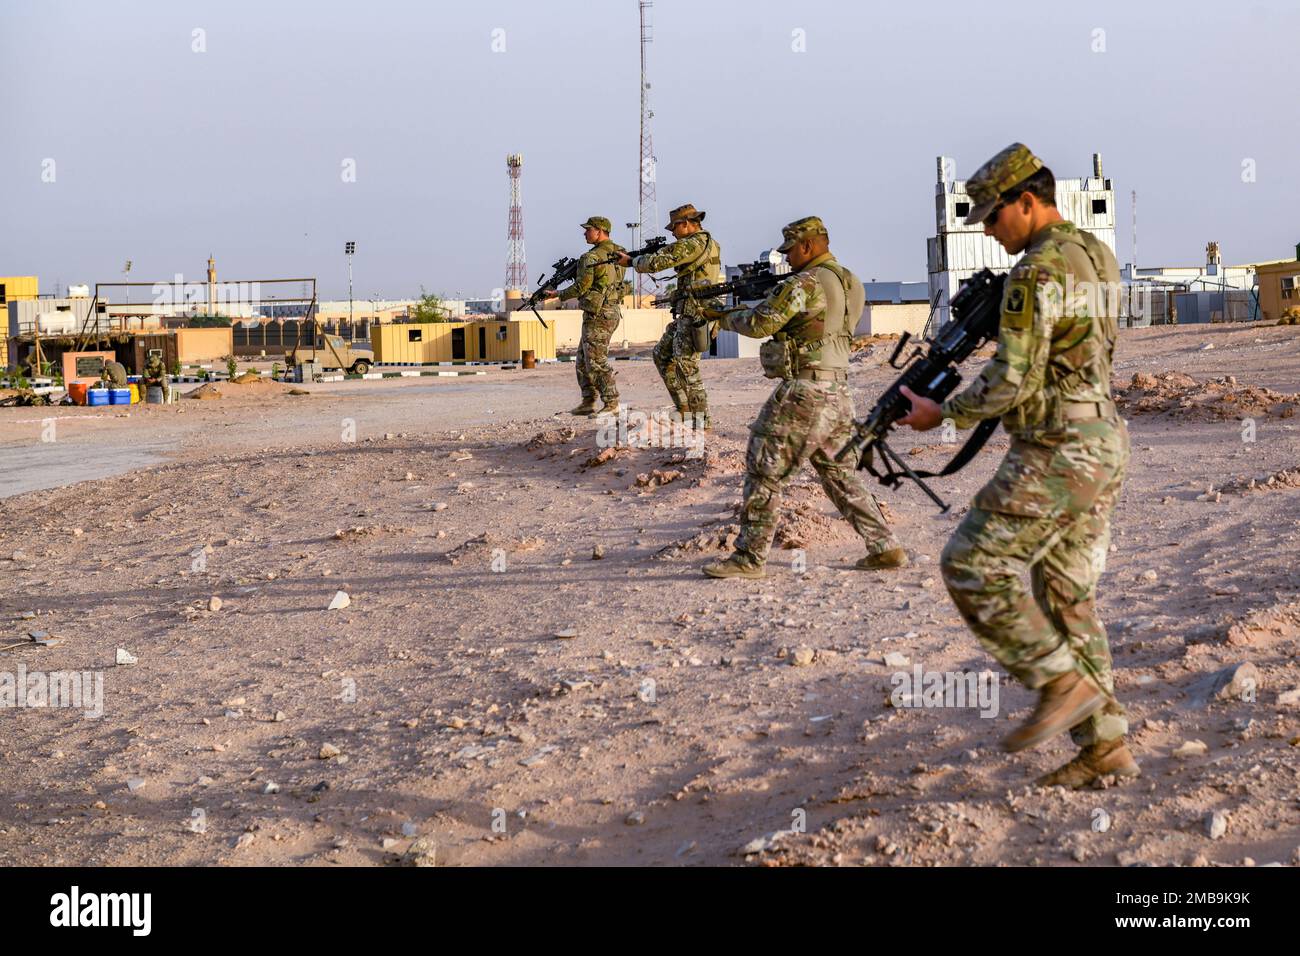 U.S. Soldiers assigned to Task Force Hurricane from the 1st Battalion, 124th Infantry Regiment, move in line during a platoon immersion in Al-Kharj, Kingdom of Saudi Arabia, June 13, 2022. The immersion was a training event meant to build interoperability between the U.S Army and Royal Saudi Land Force at the platoon level while enhancing both U.S. and partner nation skillsets. Stock Photo